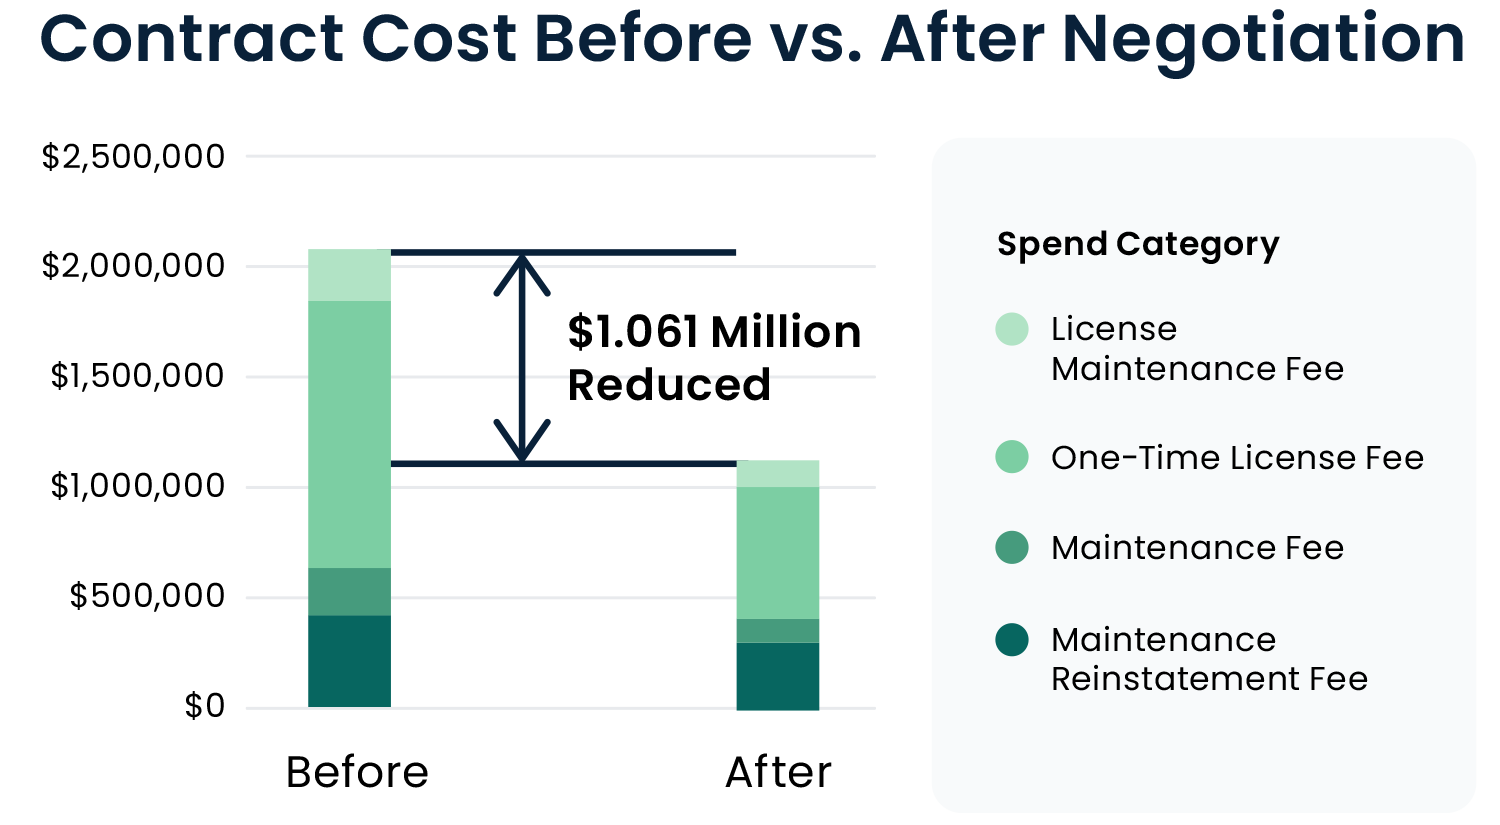 Contract Cost Before vs After Negotiation